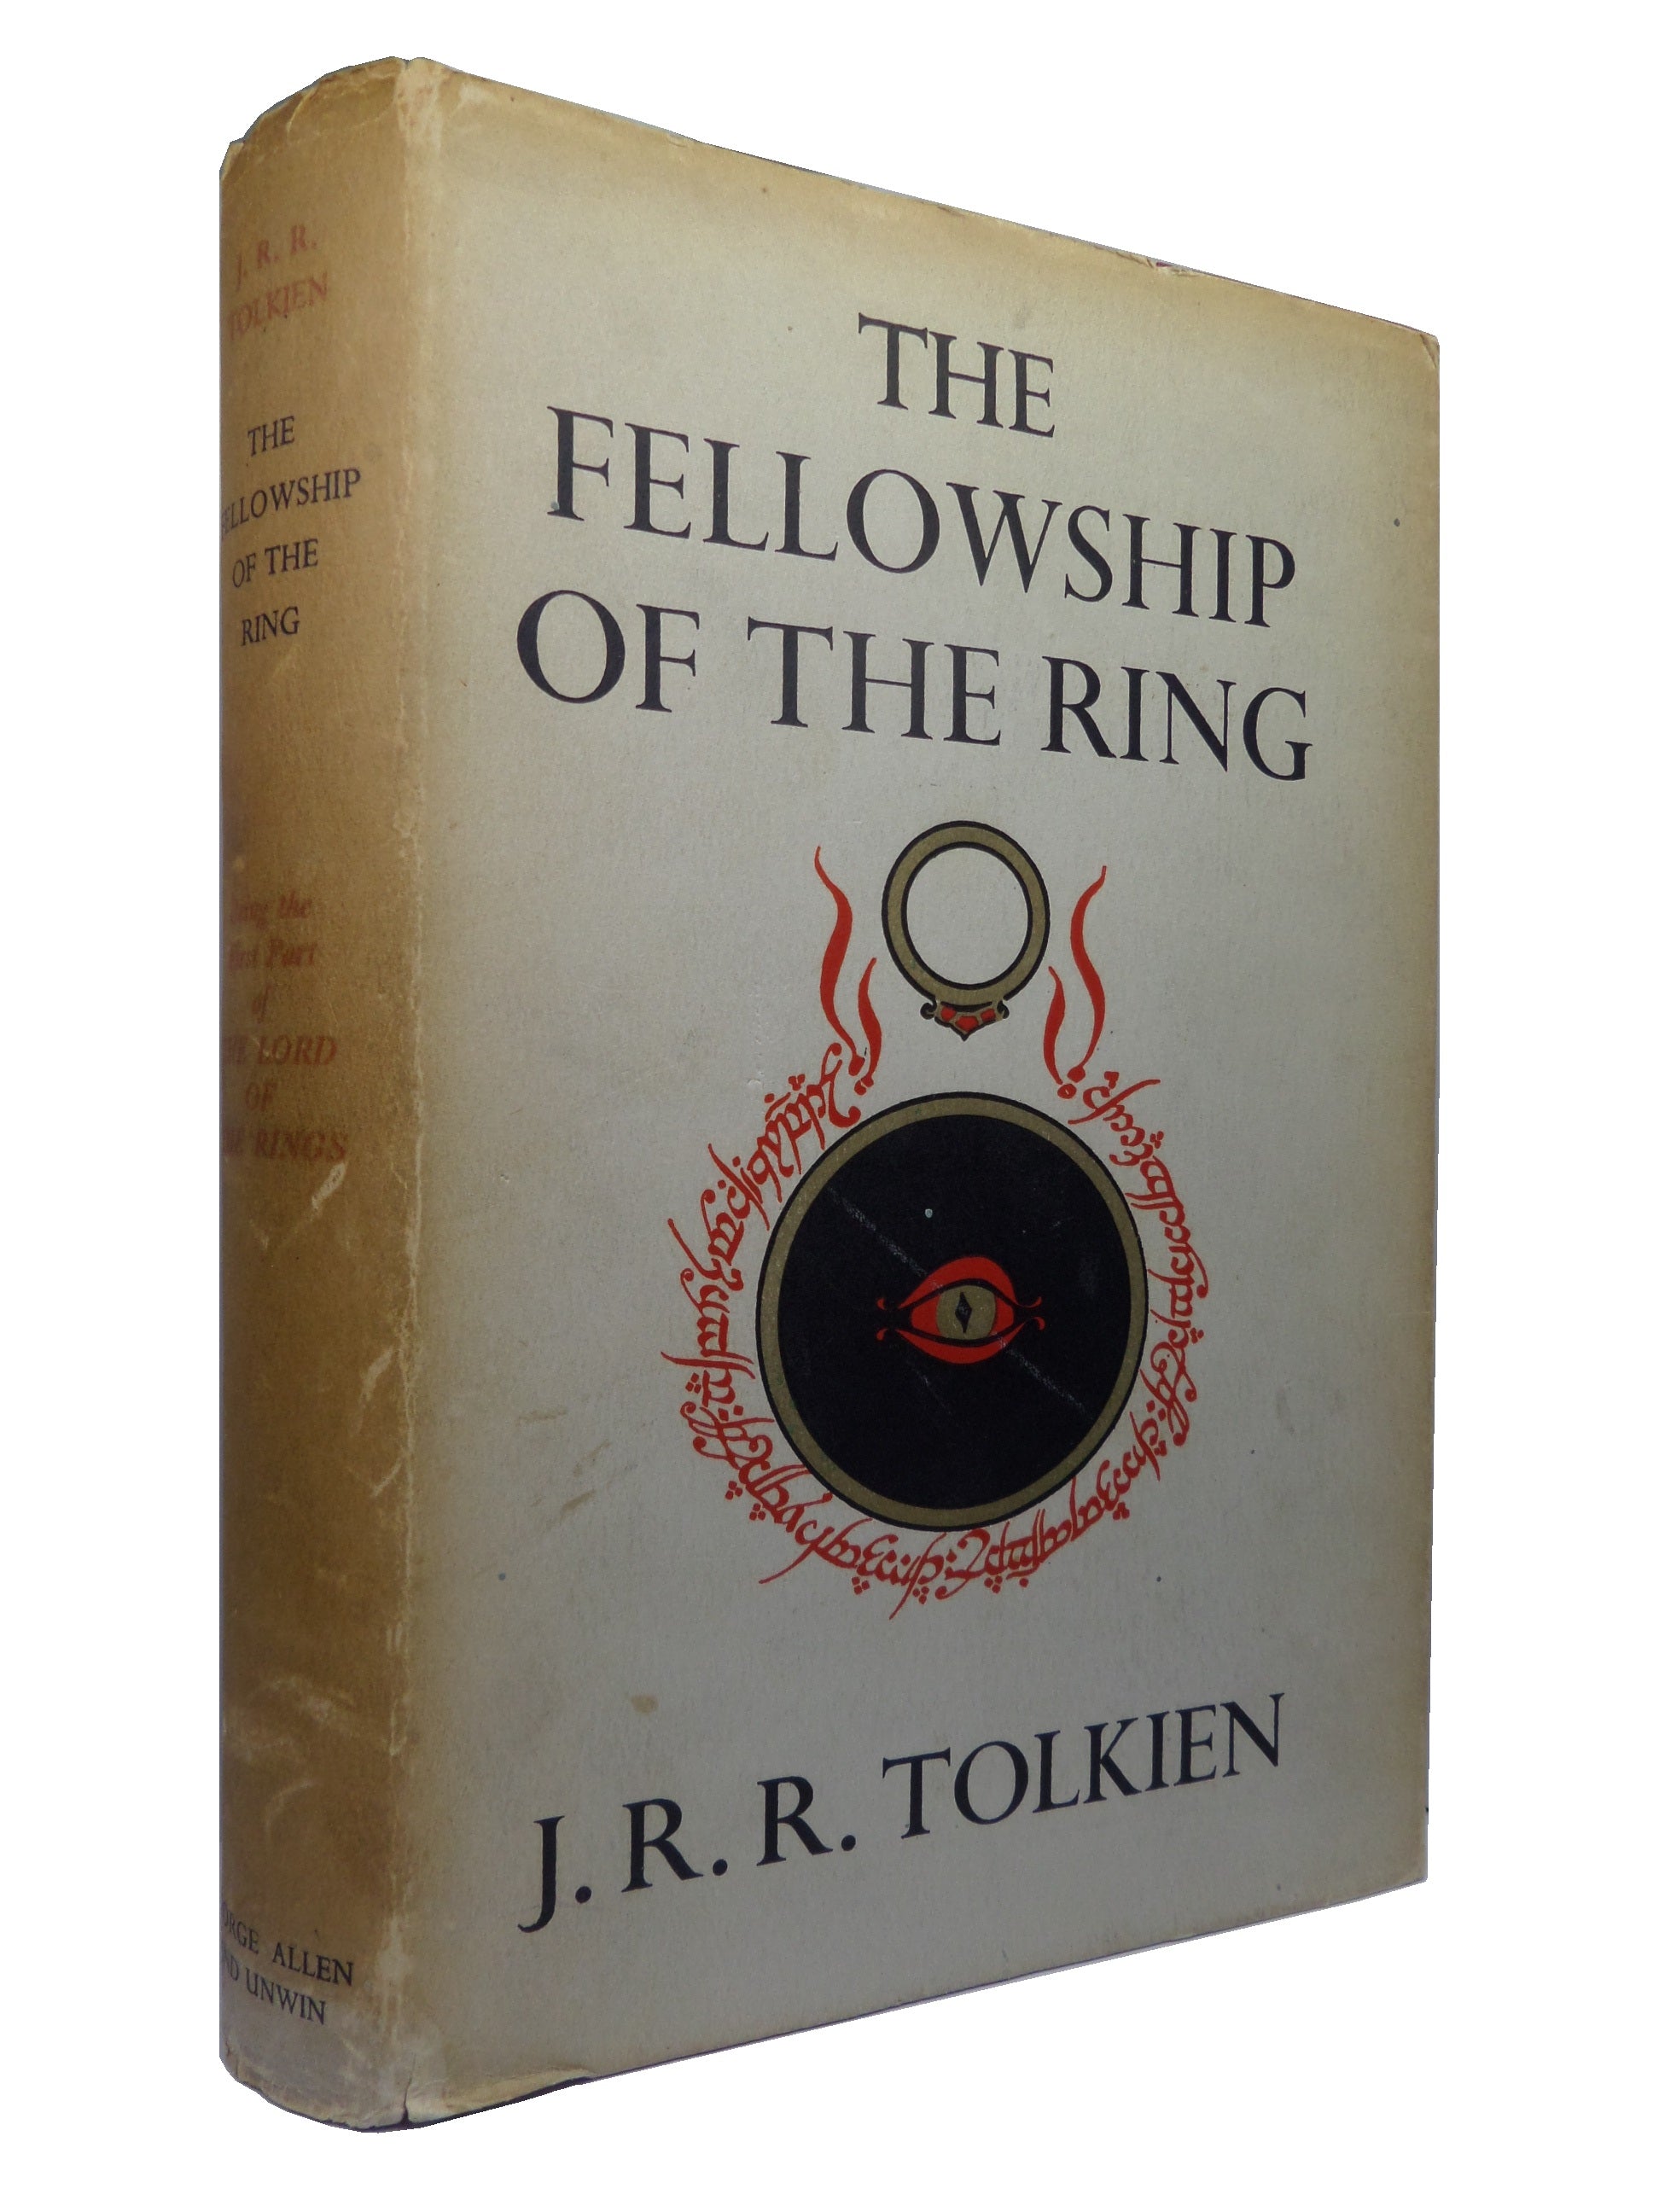 THE FELLOWSHIP OF THE RING (LORD OF THE RINGS) 1960 JRR TOLKIEN 1ST EDITION, 8TH IMPRESSION